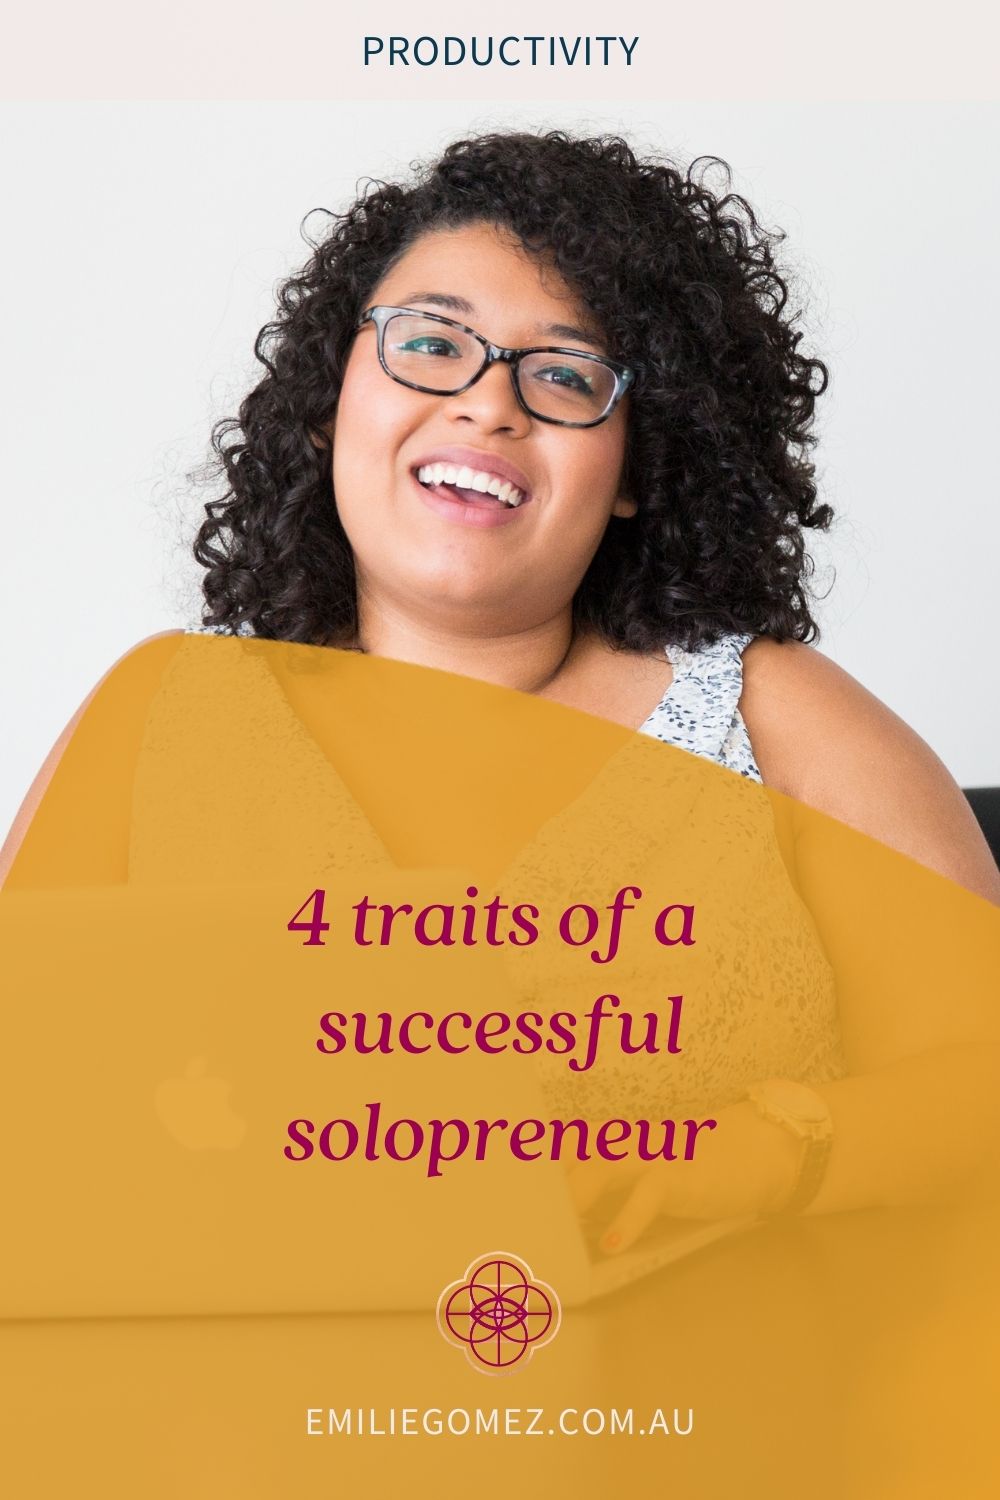 From what I’ve observed in myself and my clients over the years is that four traits matter most when running a business. When you embody these four attributes rather than focus solely on your bottom line (and all the tactics), you’ll create a profitable and sustainable business. As a solopreneur, it can be hard to know where to focus your time & money to grow your business. Use these 4 traits to help you make better decisions and build a successful business.